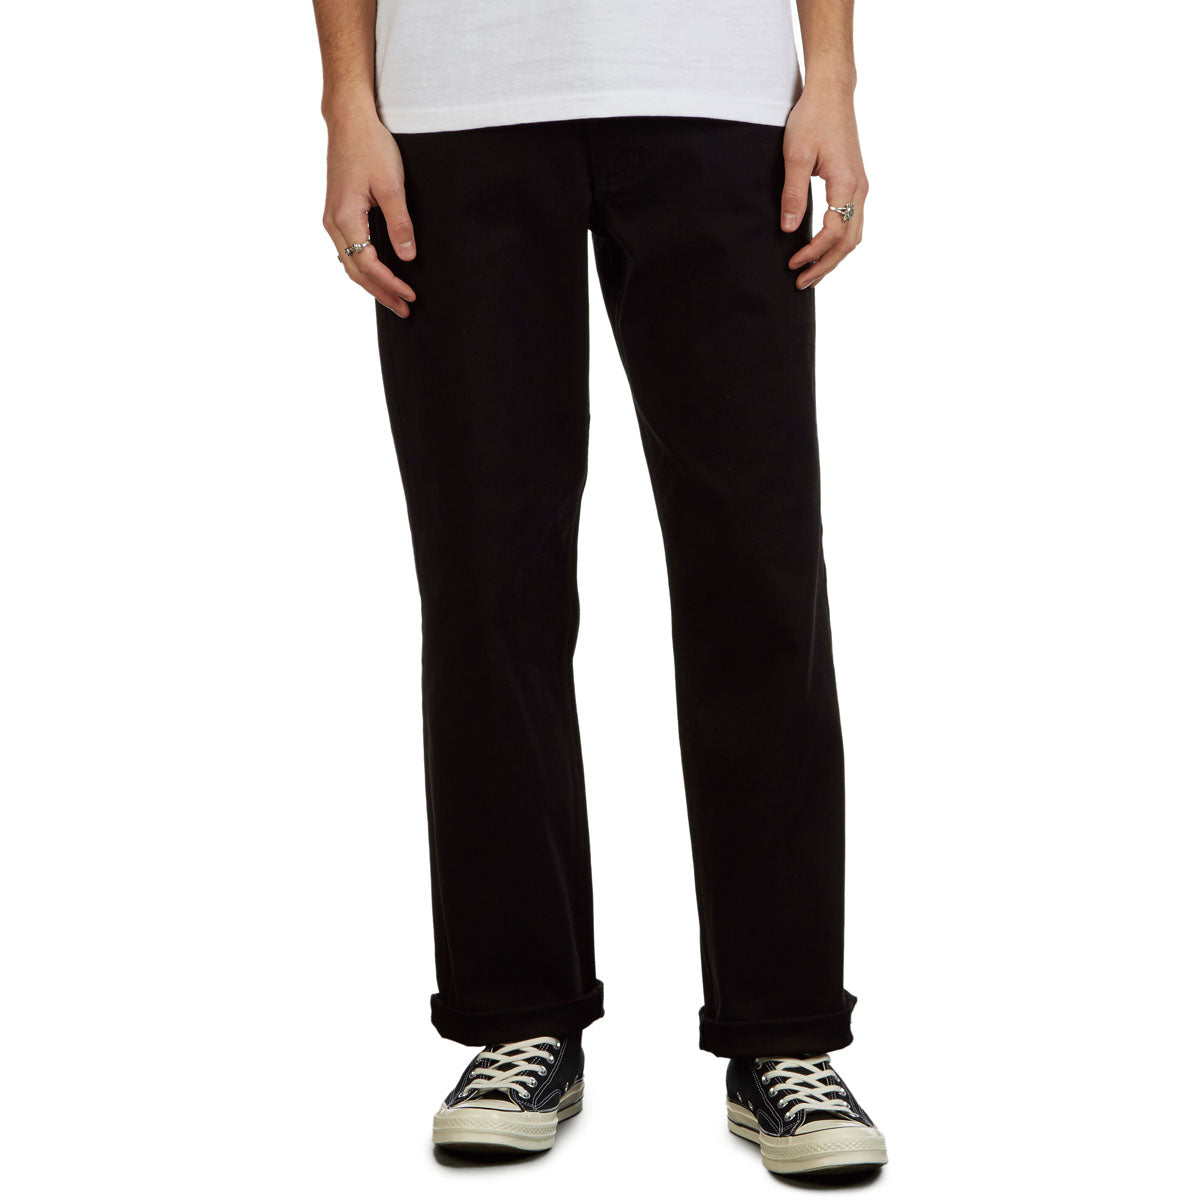 CCS Standard Plus Relaxed Chino Pants - Black image 4